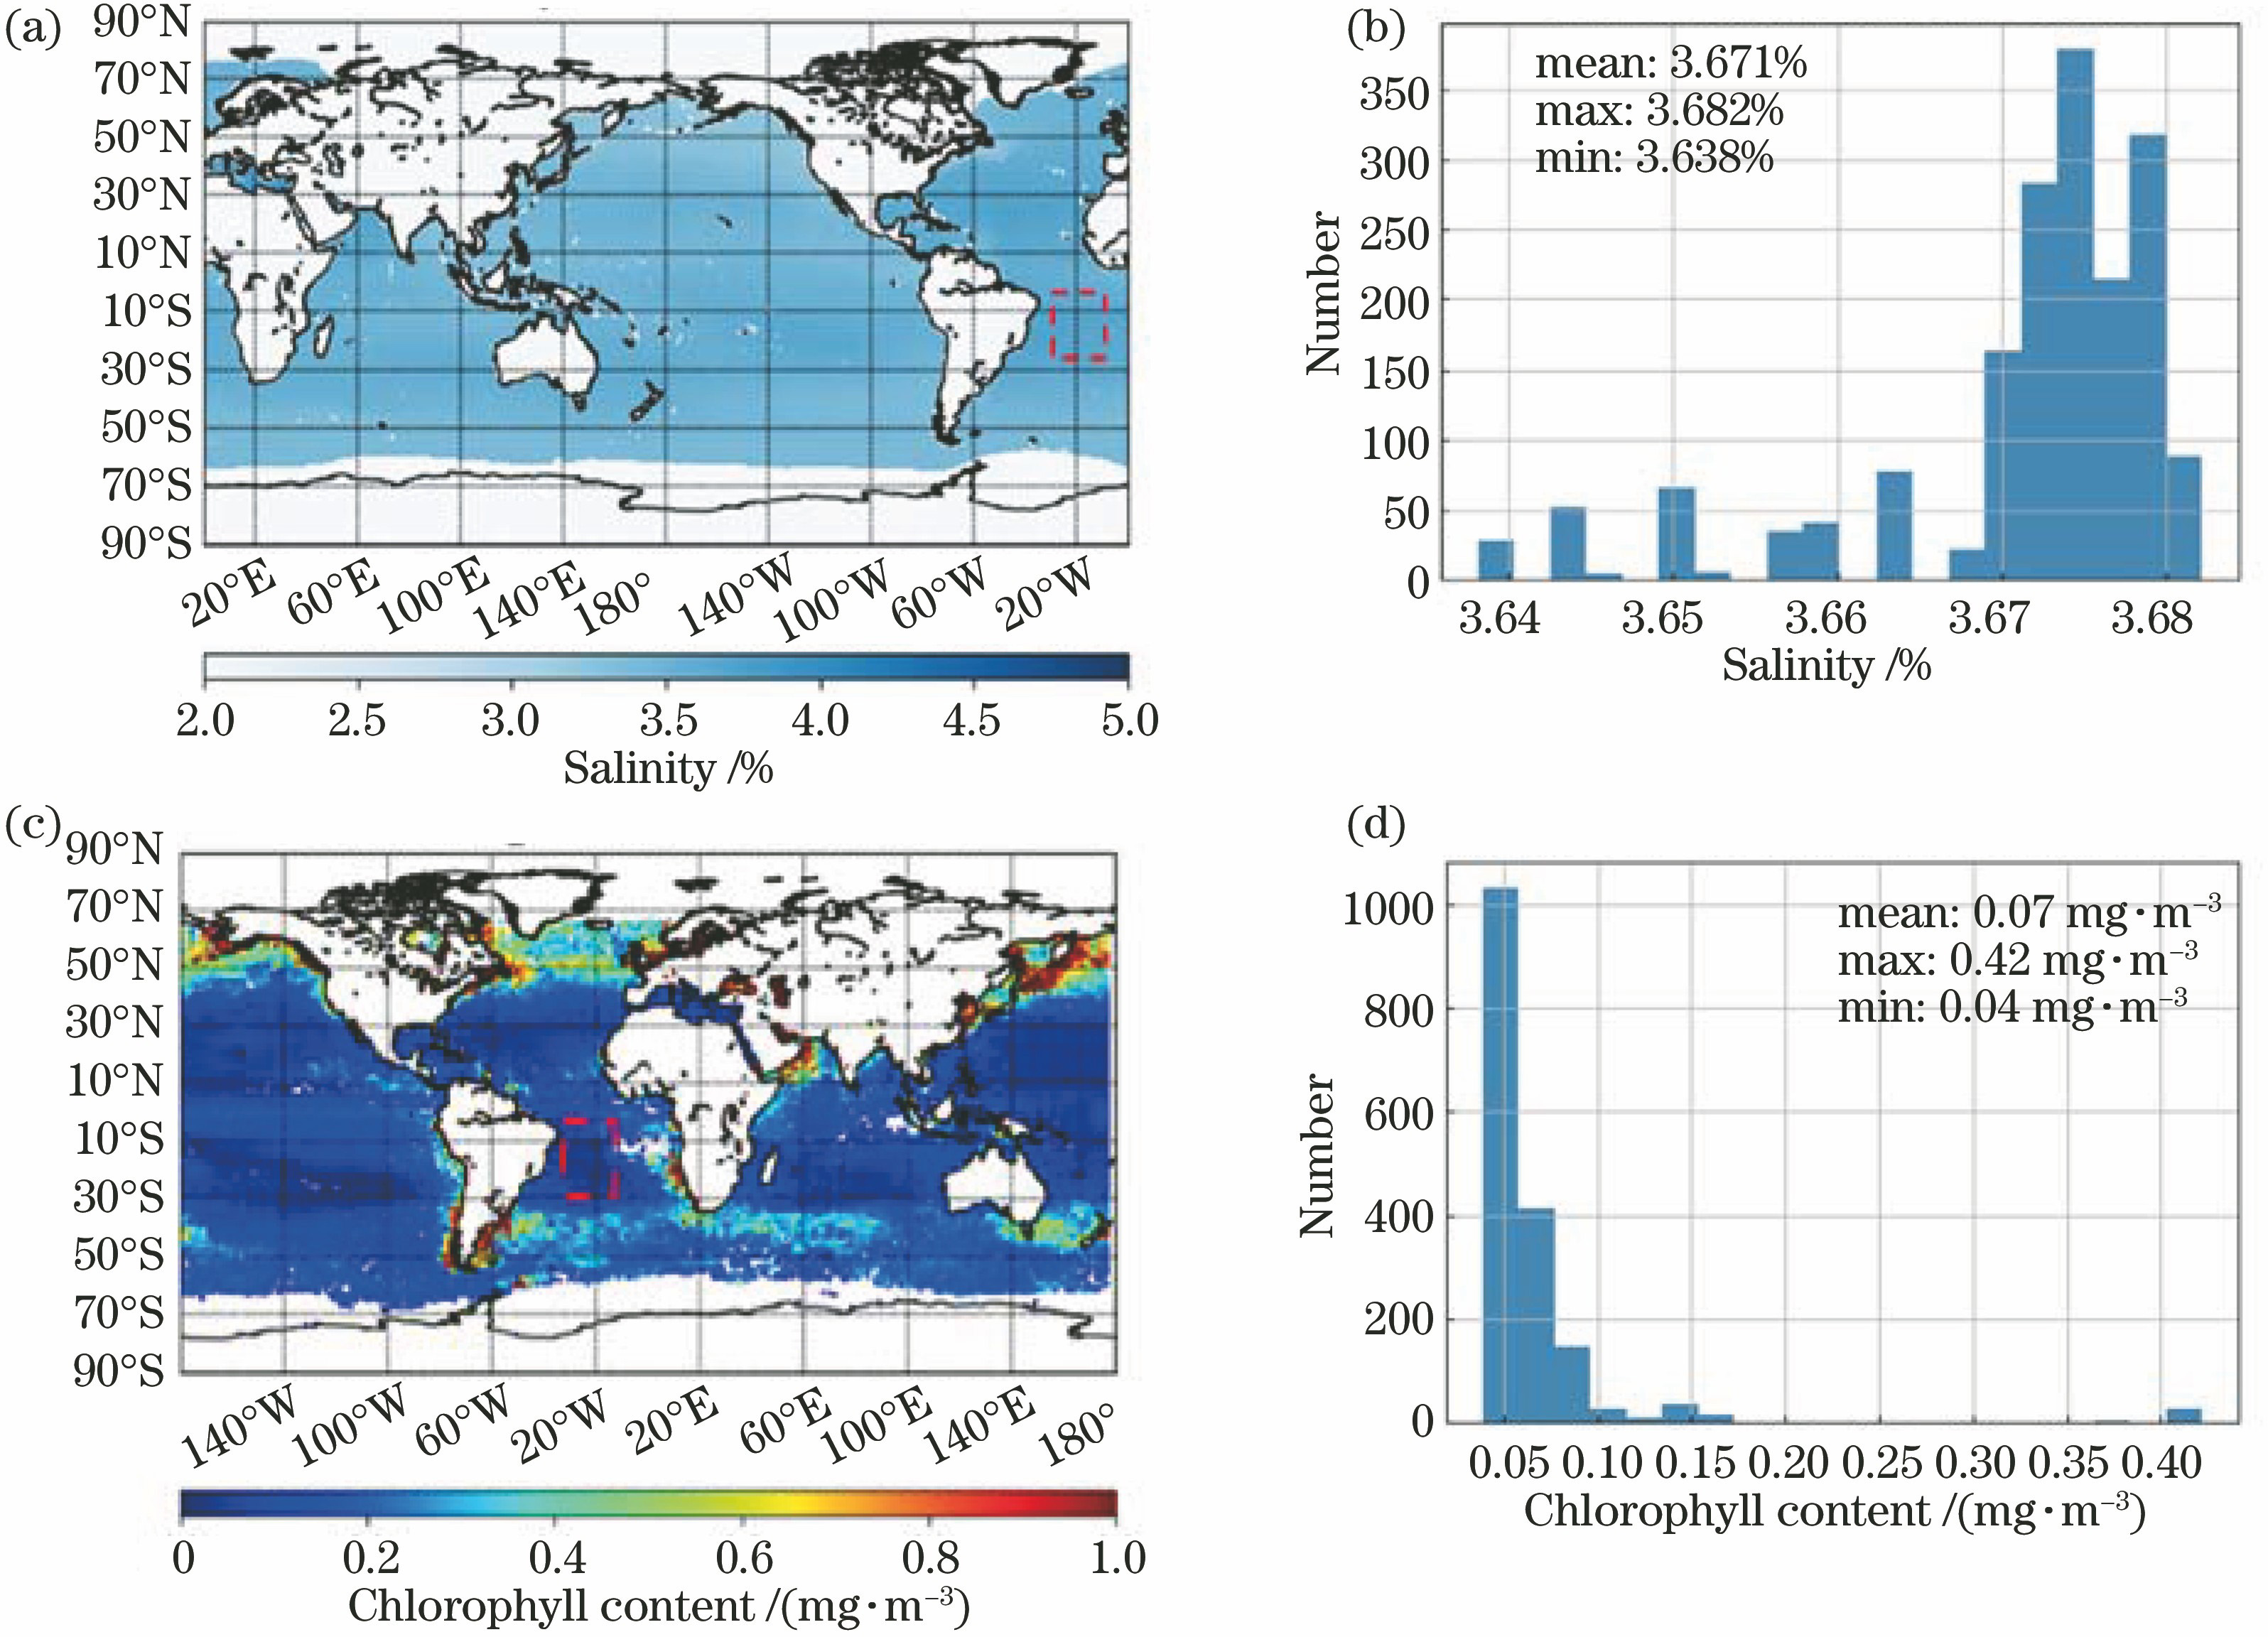 Statistics of sea water impurity content. (a) Global monthly distribution of seawater salinity;(b) statistical histogram of salinity of AltS site;(c) global monthly distribution of seawater chlorophyll content; (d) statistical histogram of chlorophyll content of AltS site